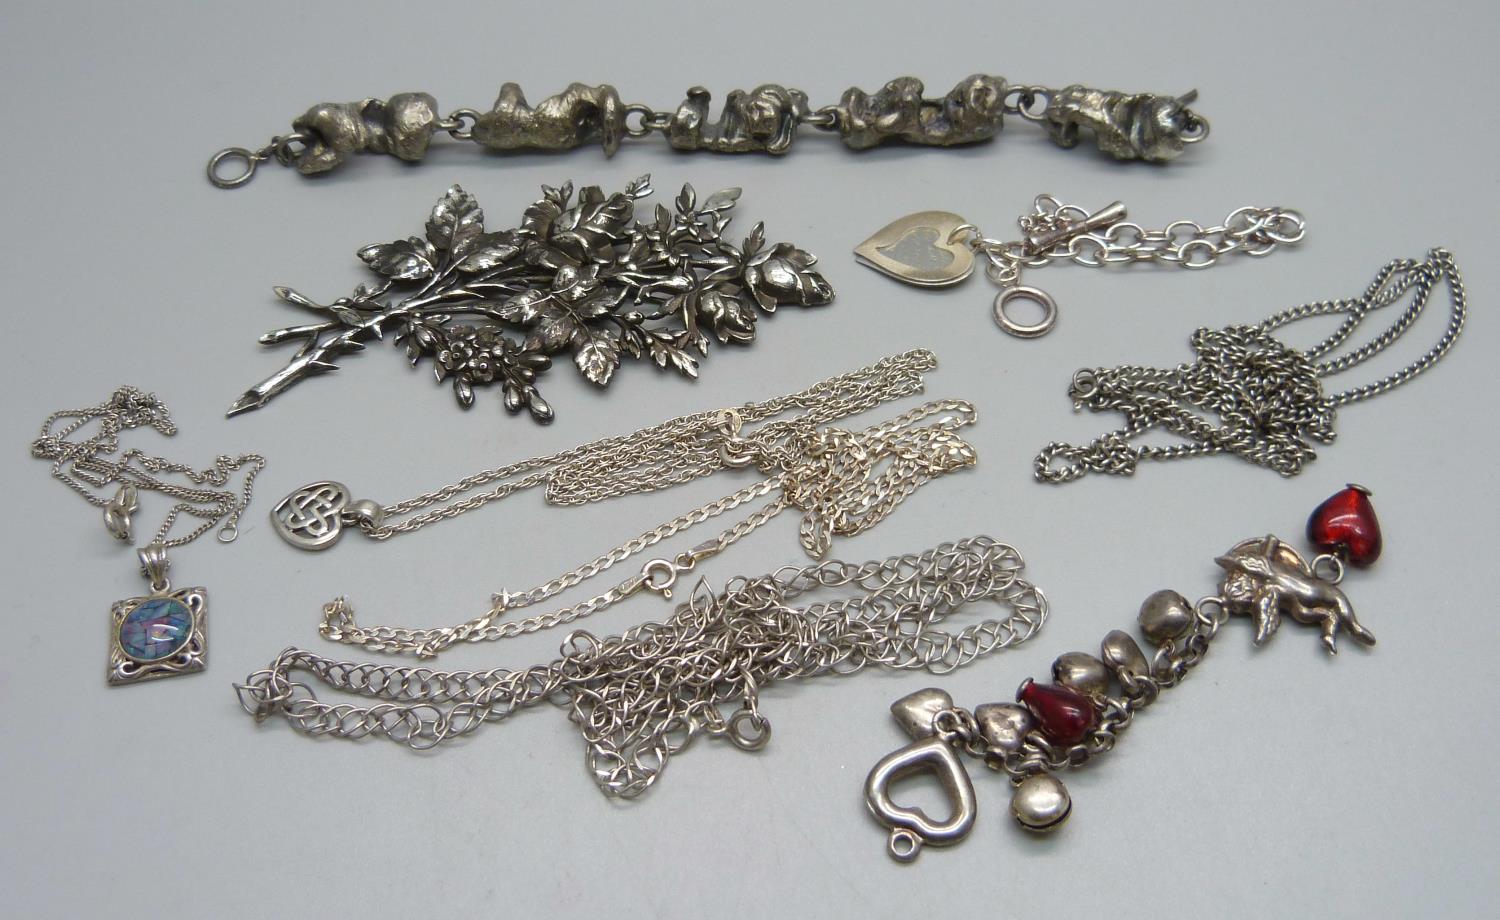 Five silver chains, two silver pendants, two bracelets, a large brooch marked 925 and a short